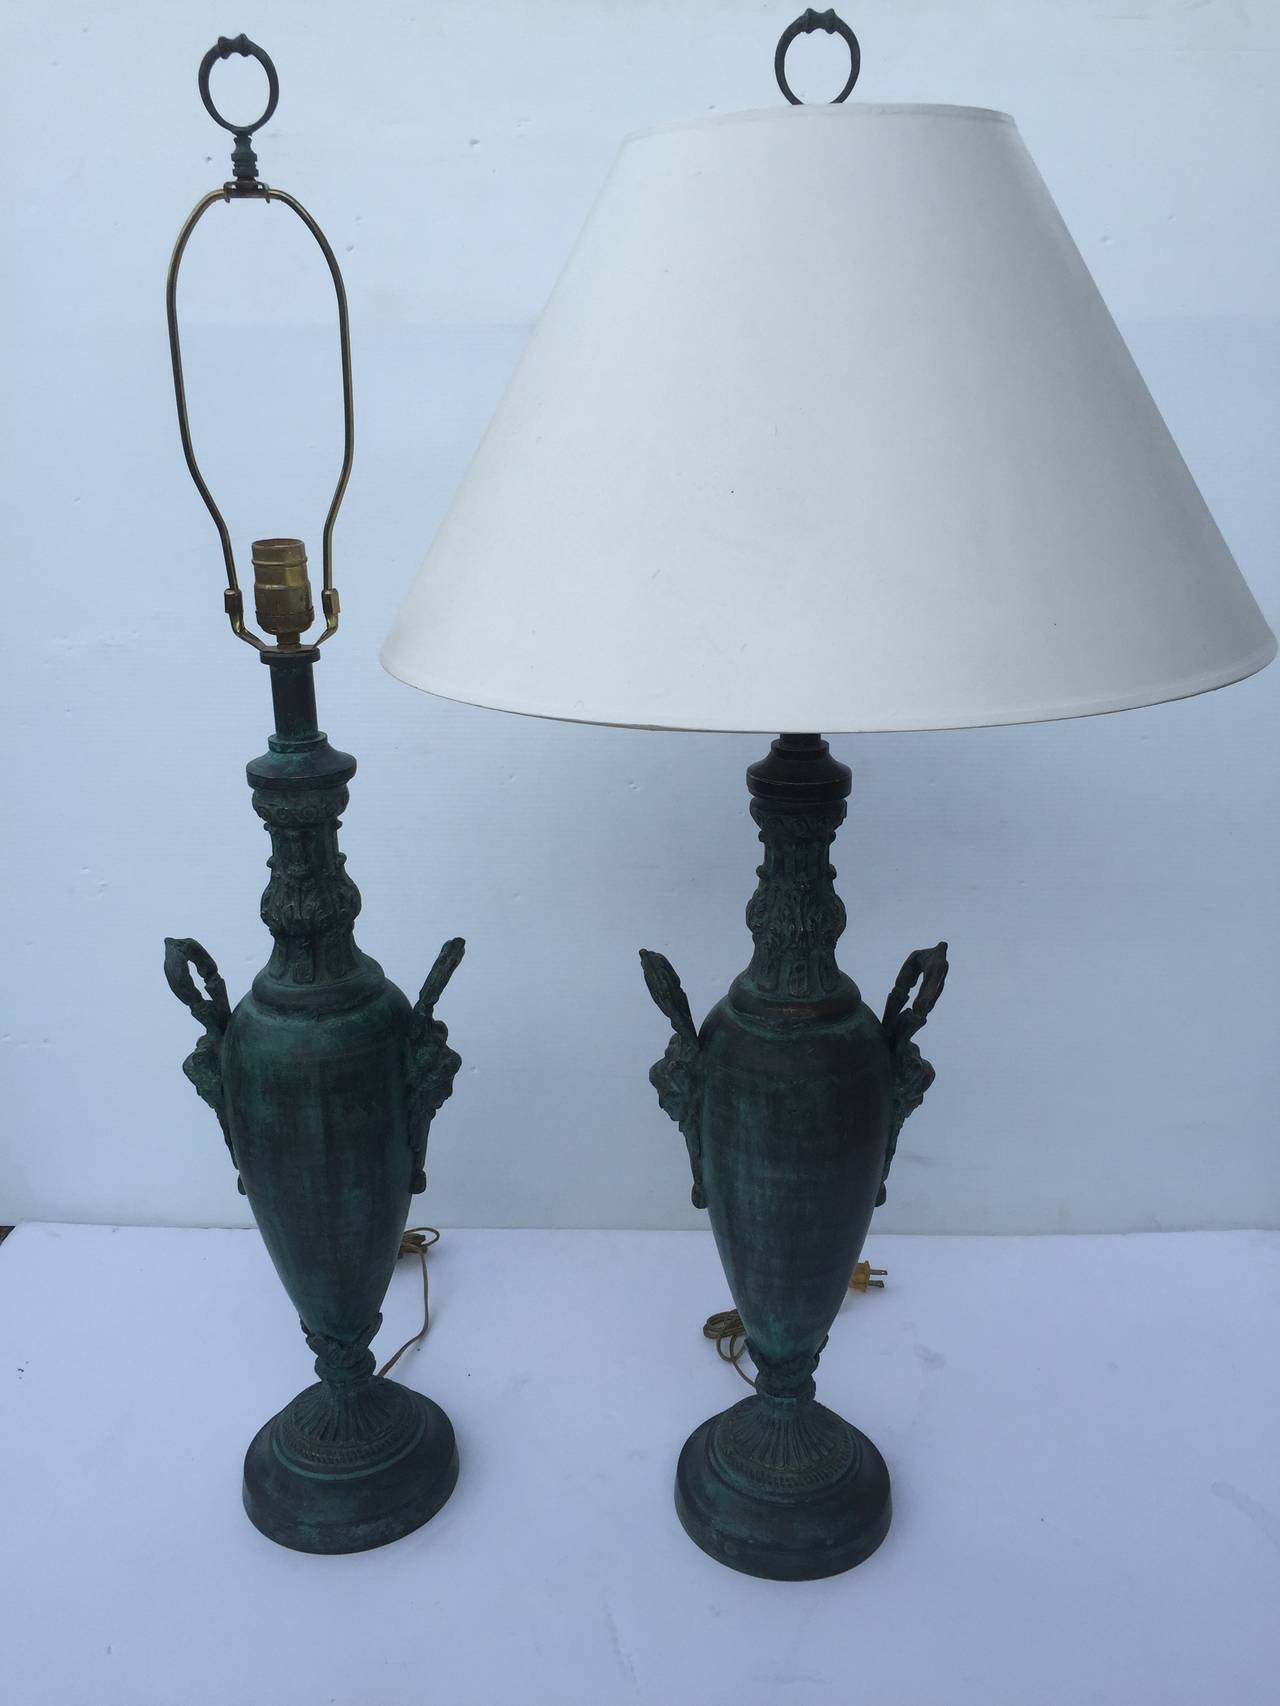 Pair of Art Nouveau Romanesque Classical Revival style solid cast brass table night lamps with original finials at 39". Shown here with 21 x 11 shade
Measures: D 8, H 25.75.